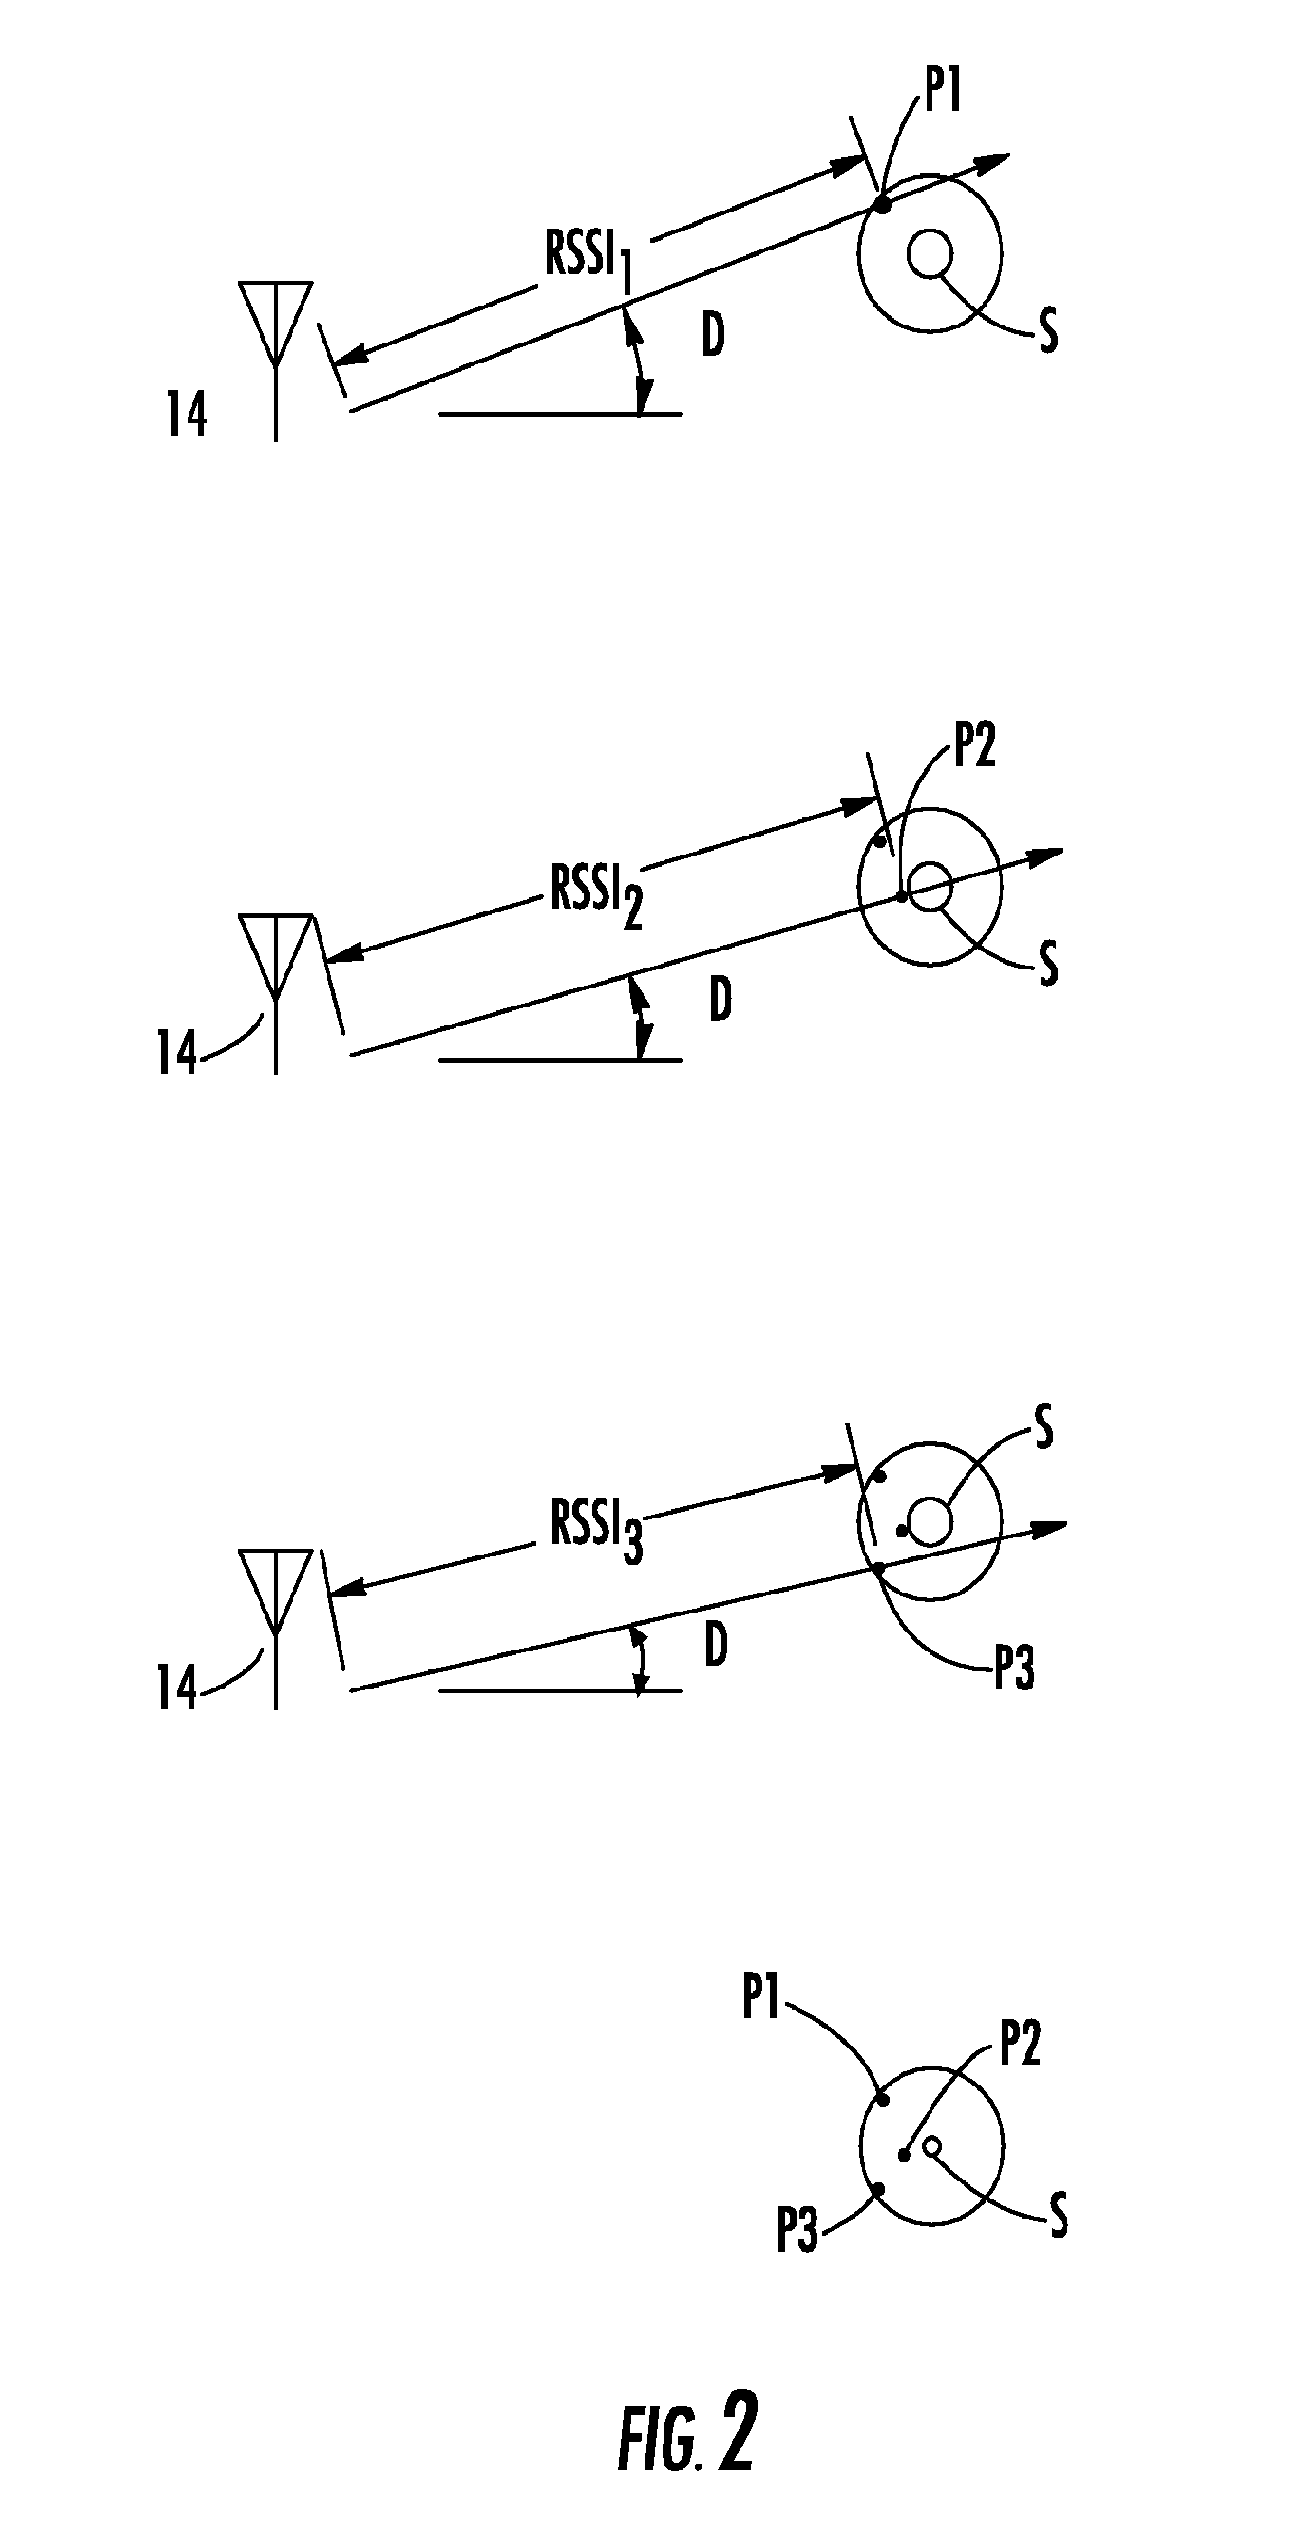 Radio frequency signal acquisition and source location system